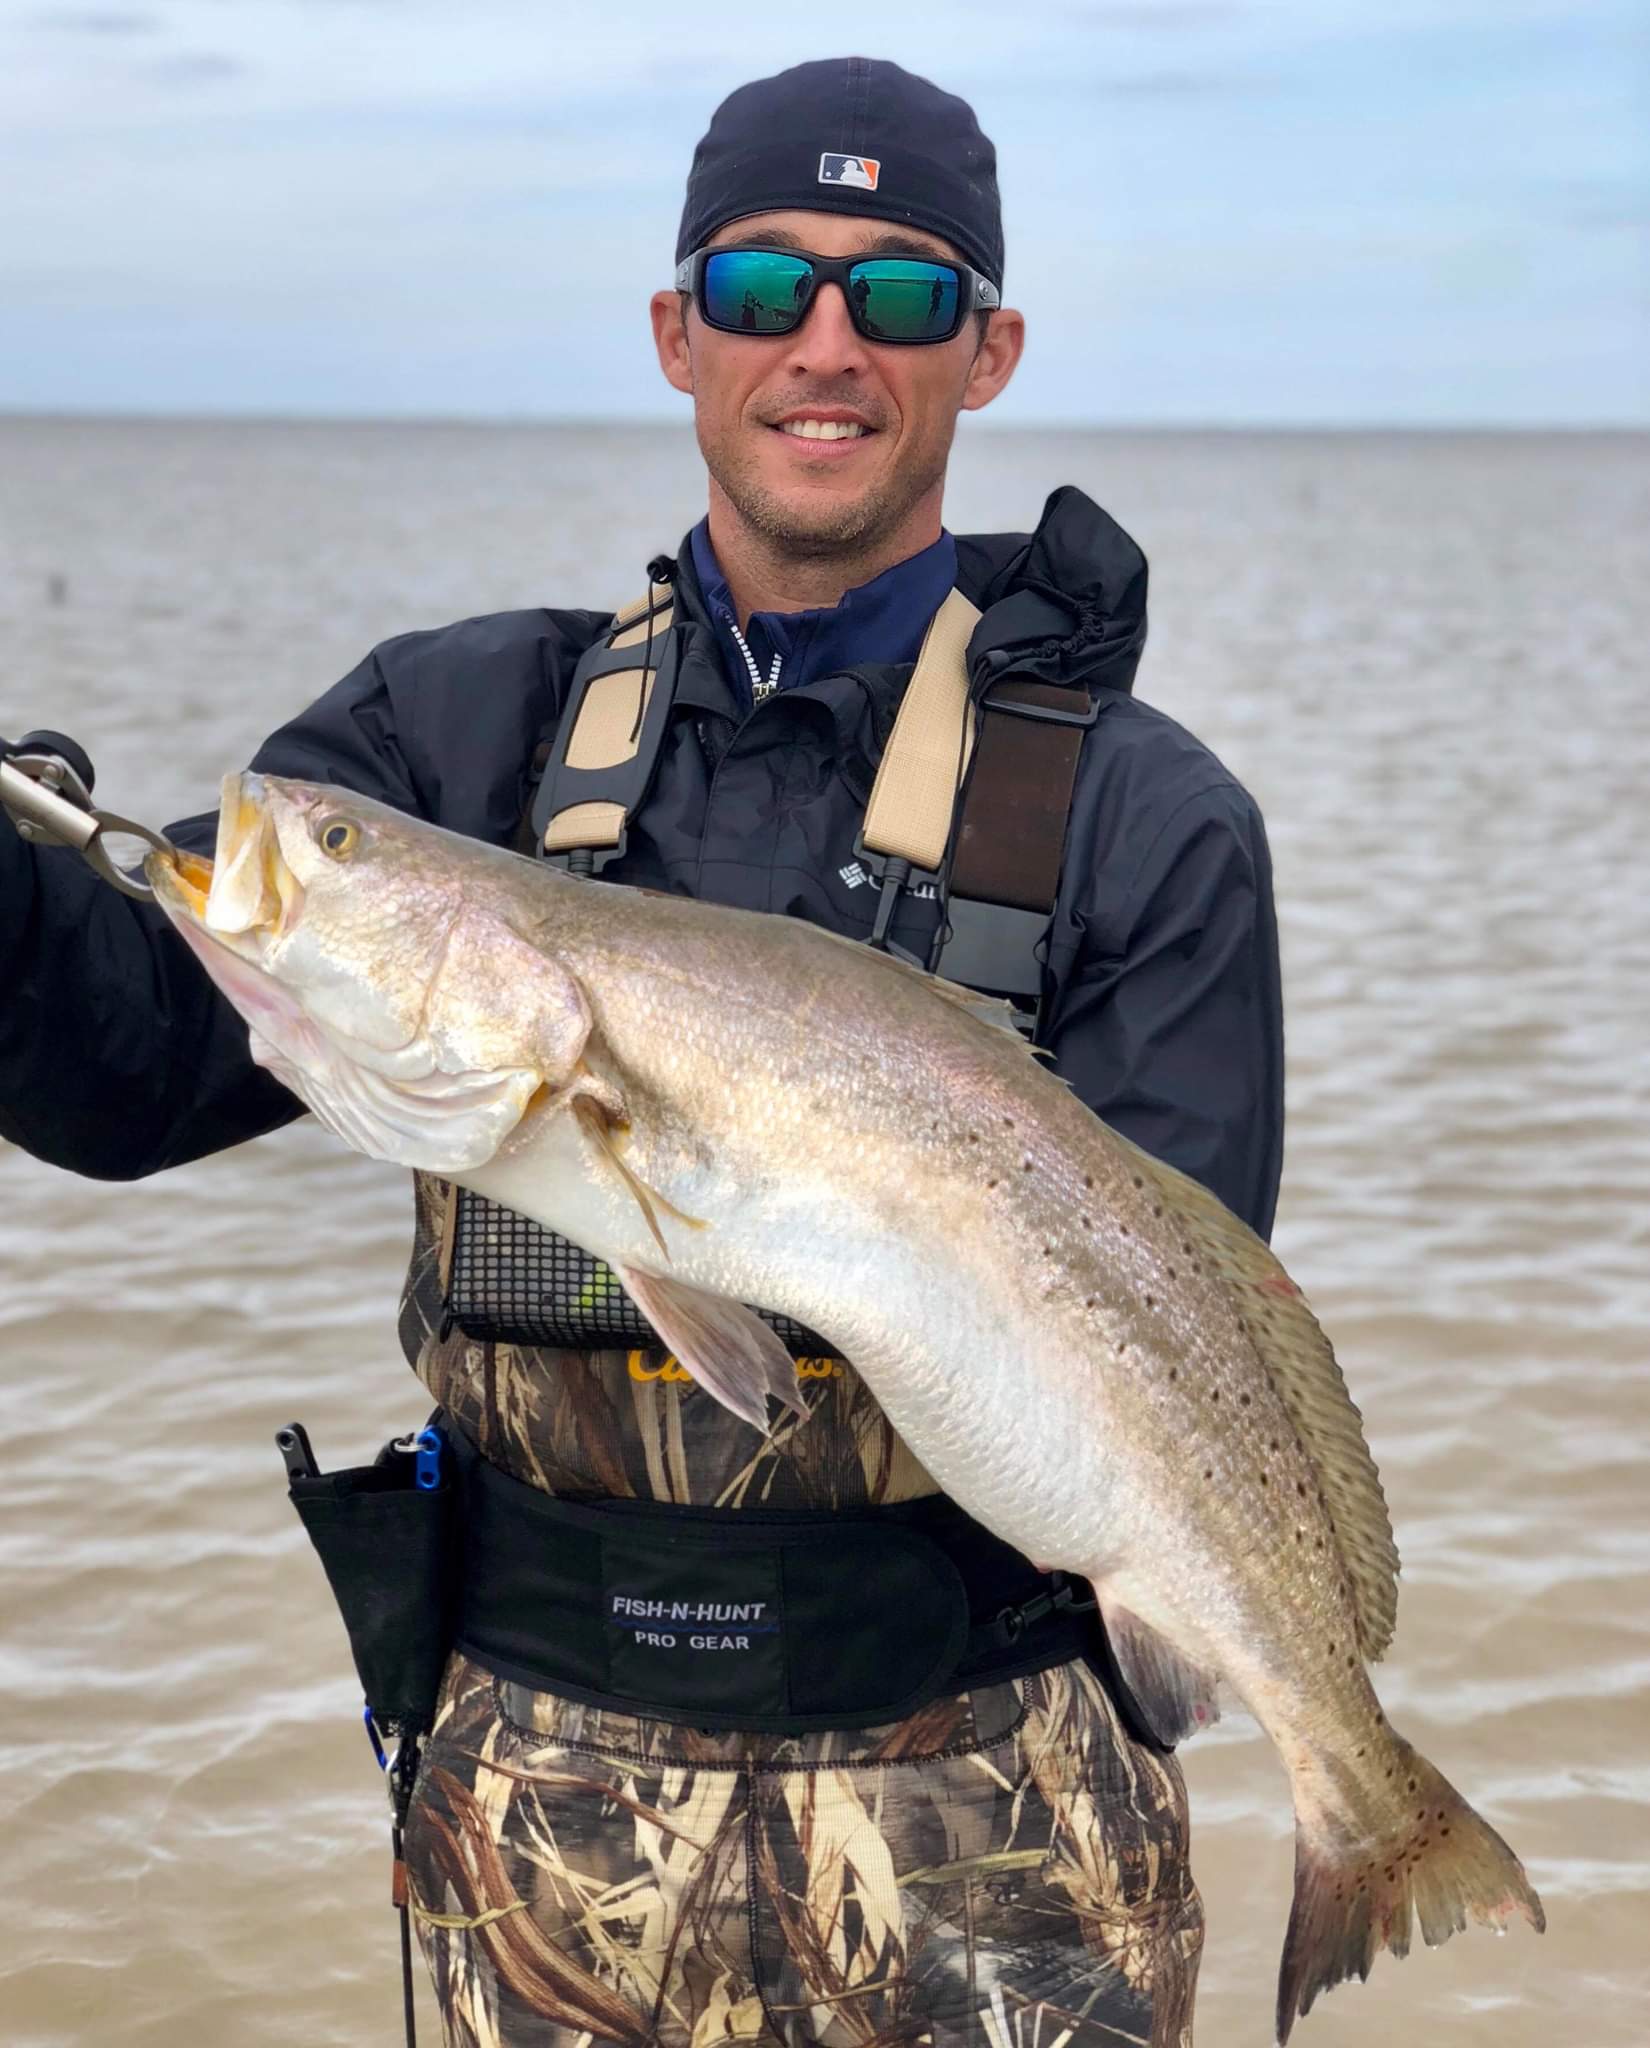 Seth LaHaye of Lafayette joined the Dirty 30 with this 30 1/2-inch speck, caught in East Matagorda Bay in Texas.